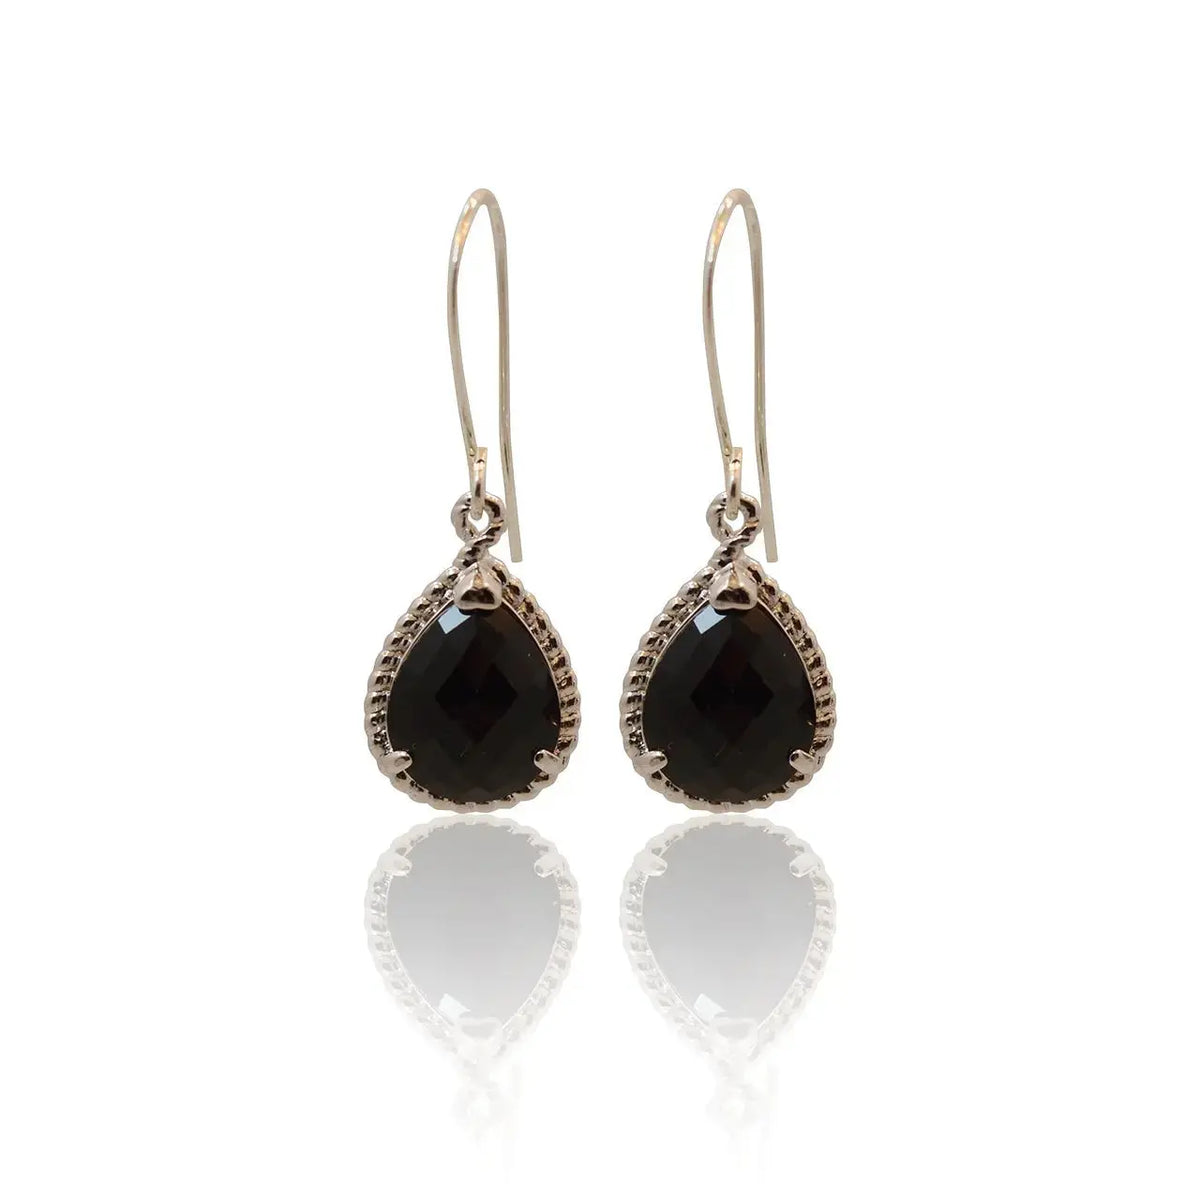 Black Exquisite Earrings | Classic Best Seller - Mystic Soul Jewelry